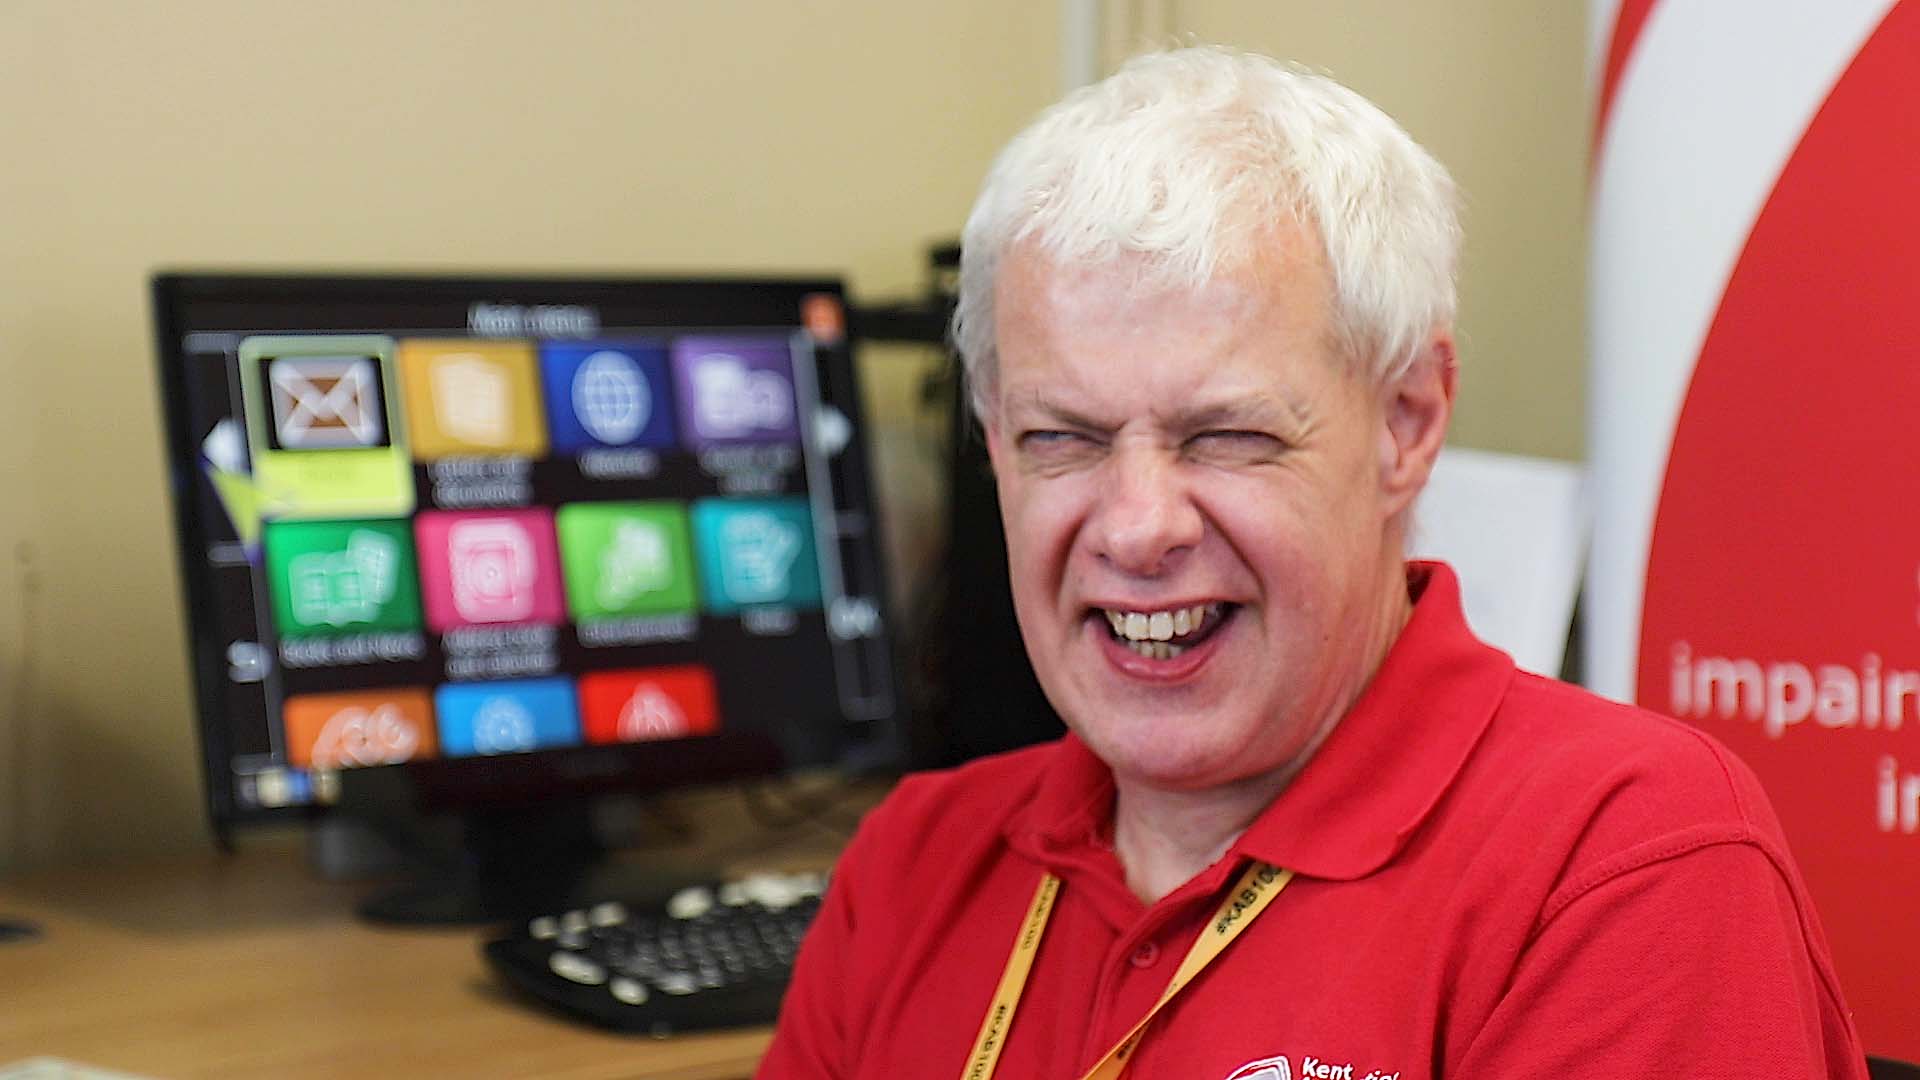 Steve, Assistive Tech Worker at KAB in front of a screen displaying GuideConnect